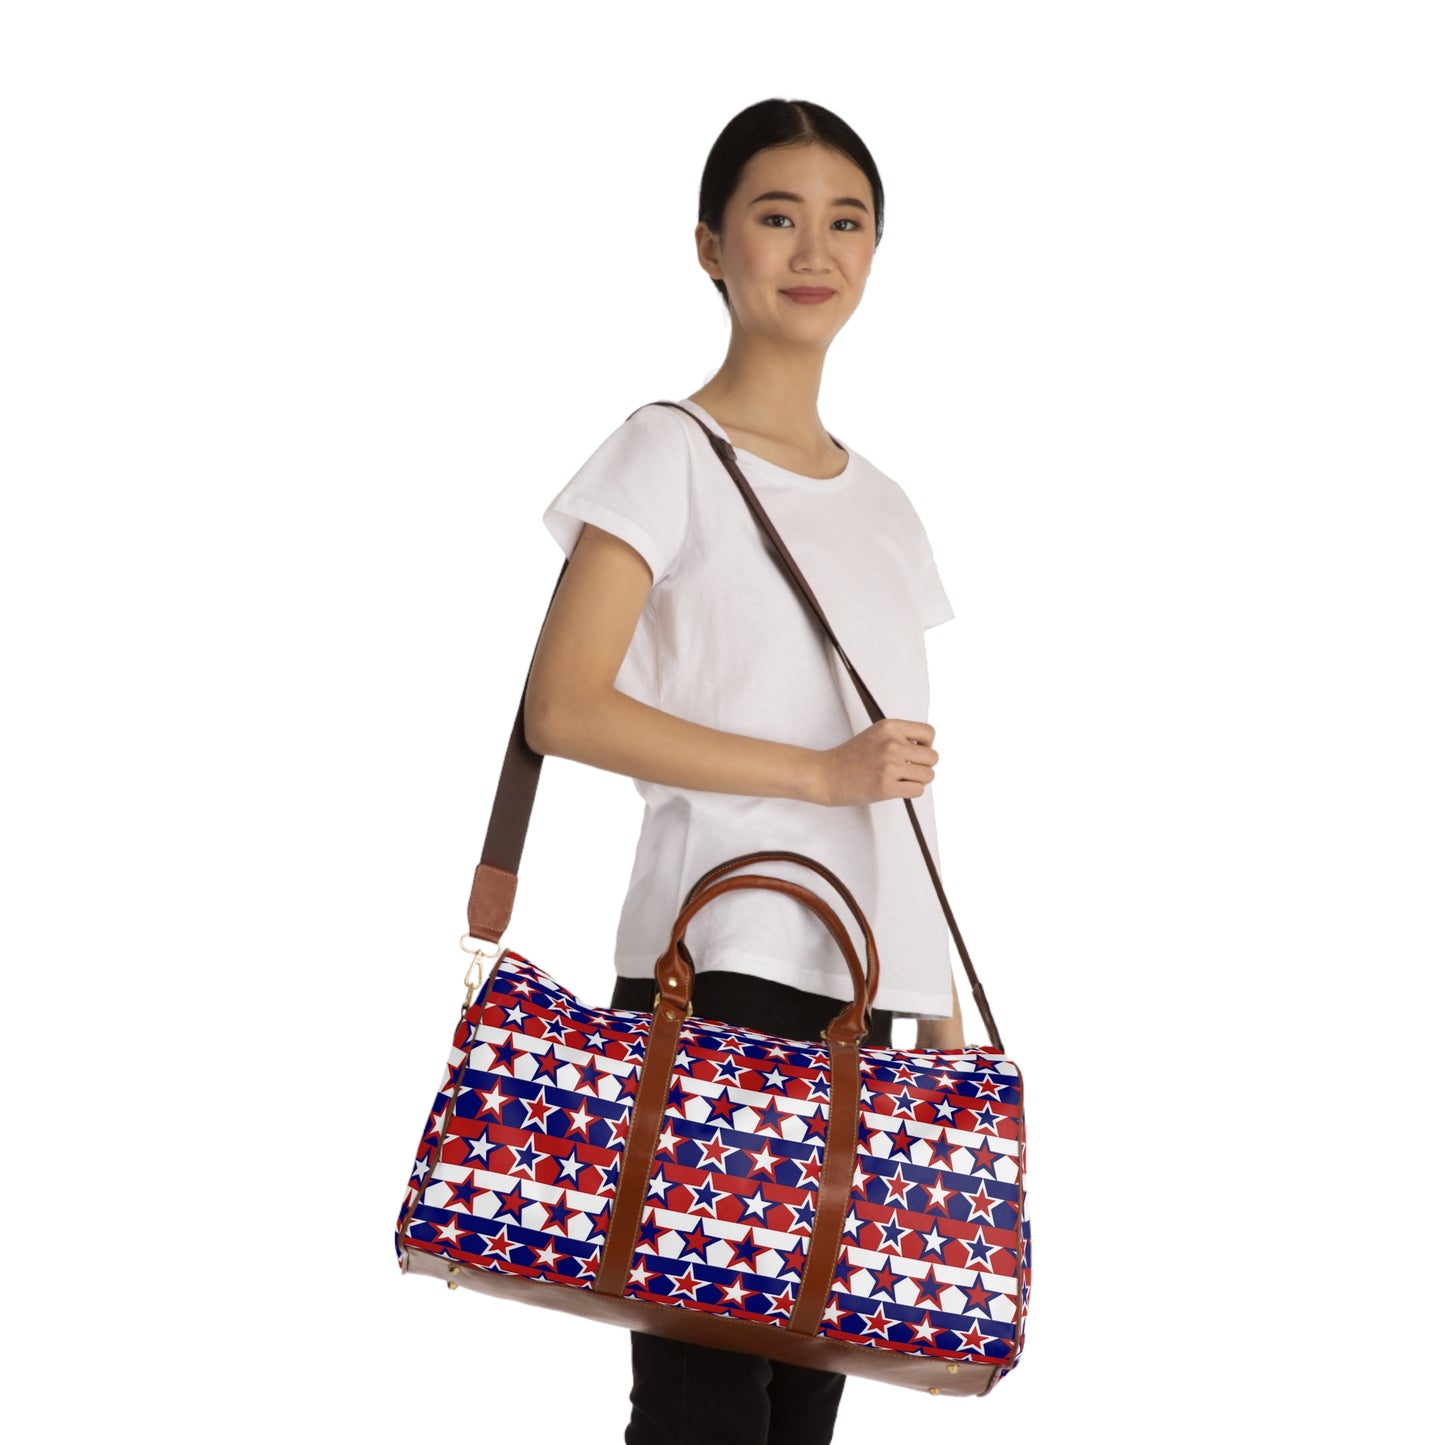 Red White and Blue Stars - Stripes - Waterproof Travel Bag